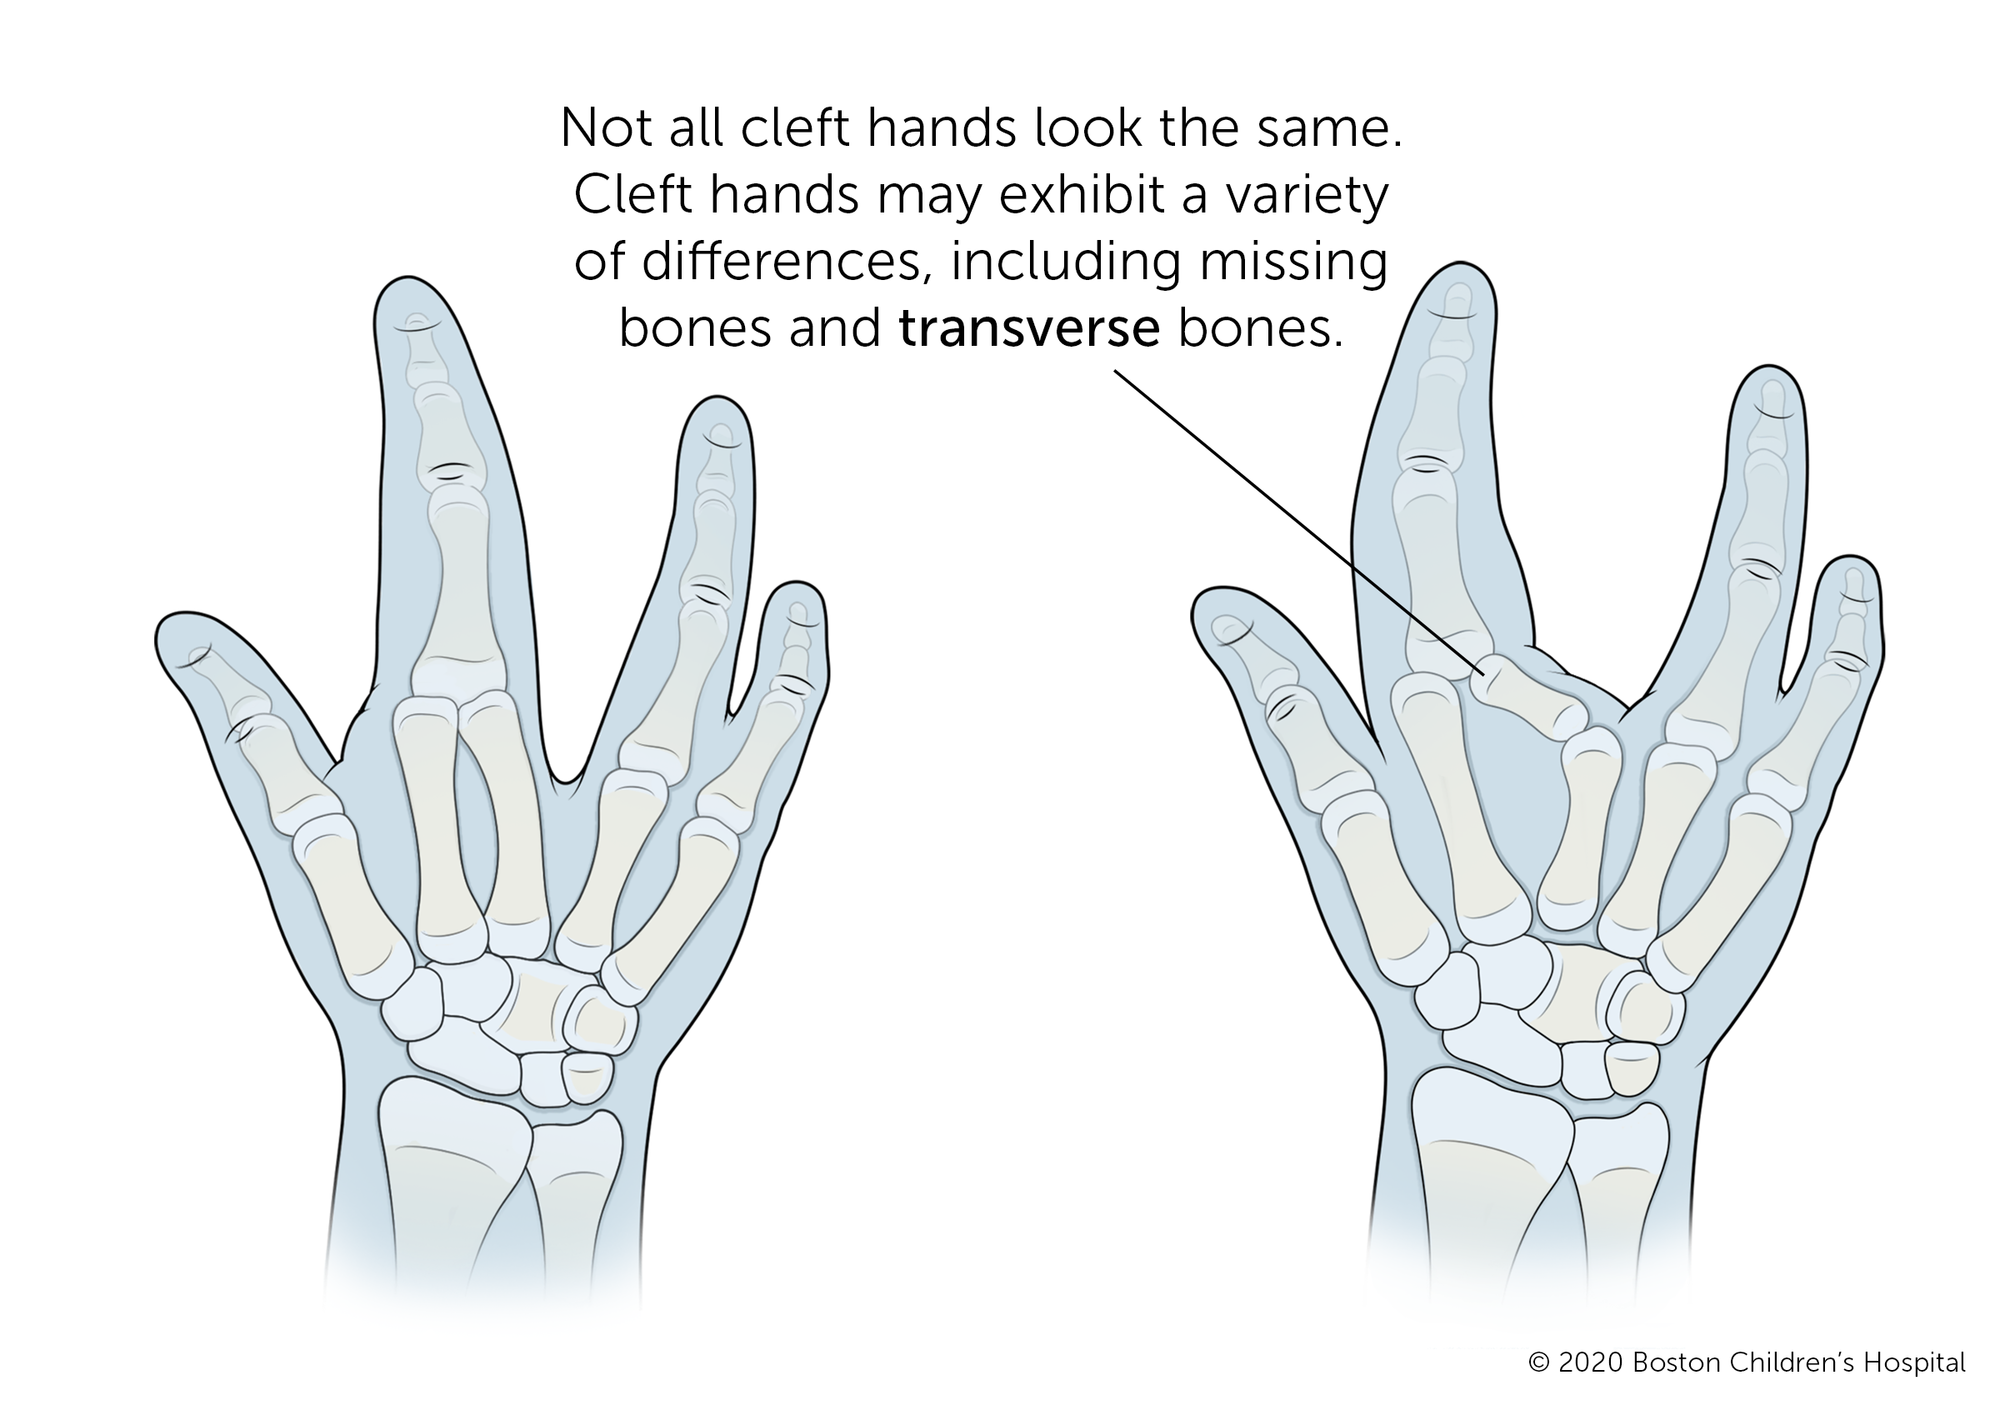 Typically, a cleft hand is missing a finger or fingers in the middle of the hand and has a pronounced V-shaped cleft in that space. But not all cleft hands look the same. Cleft hands may exhibit a variety of differences such as missing bones and transverse bones. In some cases, the cleft occurs on the thumb side or pinkie side of the hand.